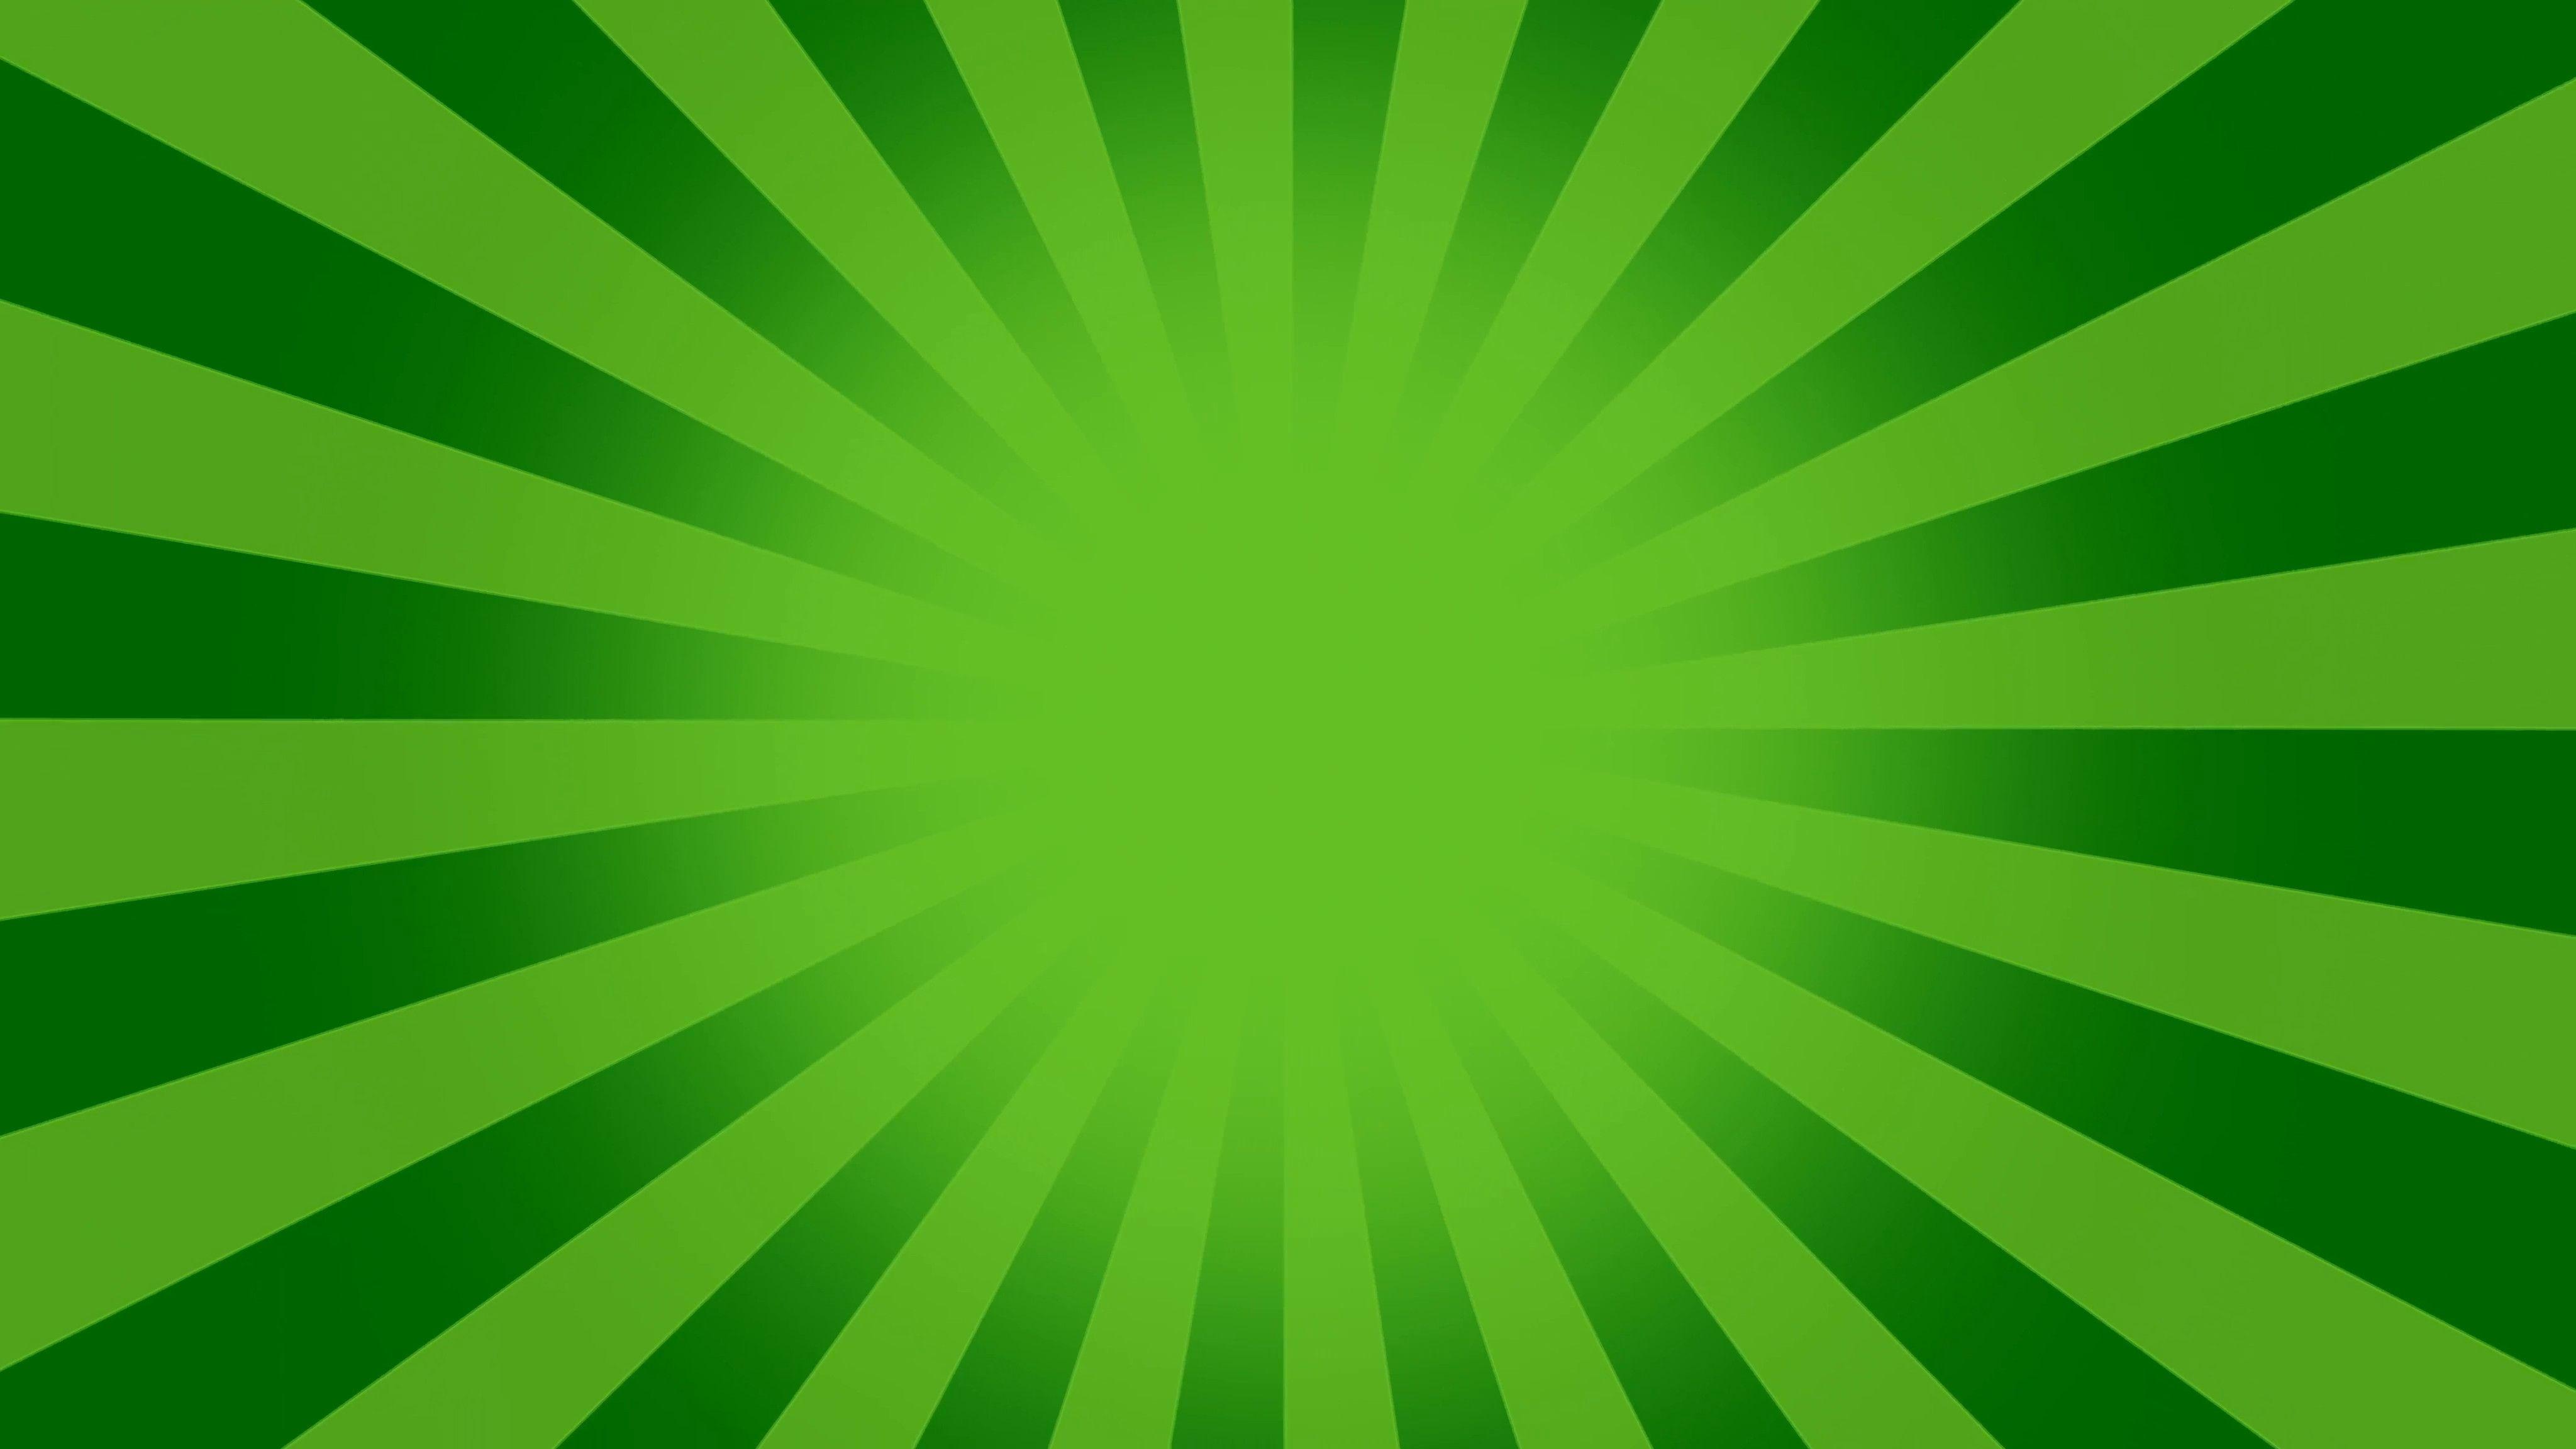 Green Burst Vector Background Cartoon With Space For Alluring Image